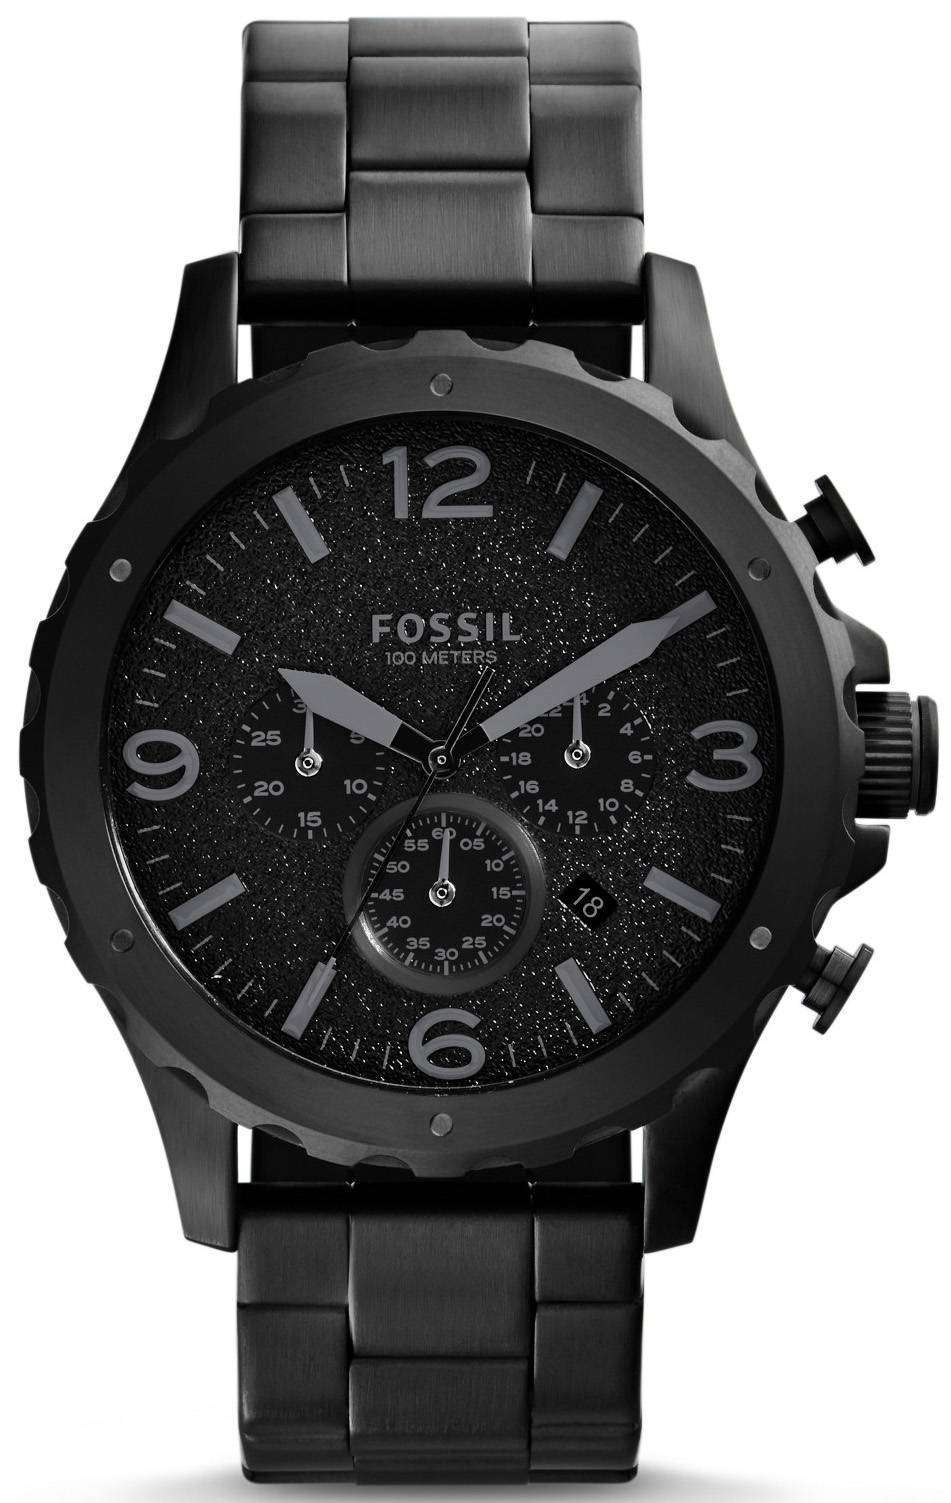 Fossil Nate Chronograph Black Dial JR1470 Men's Watch - CityWatches.co.uk